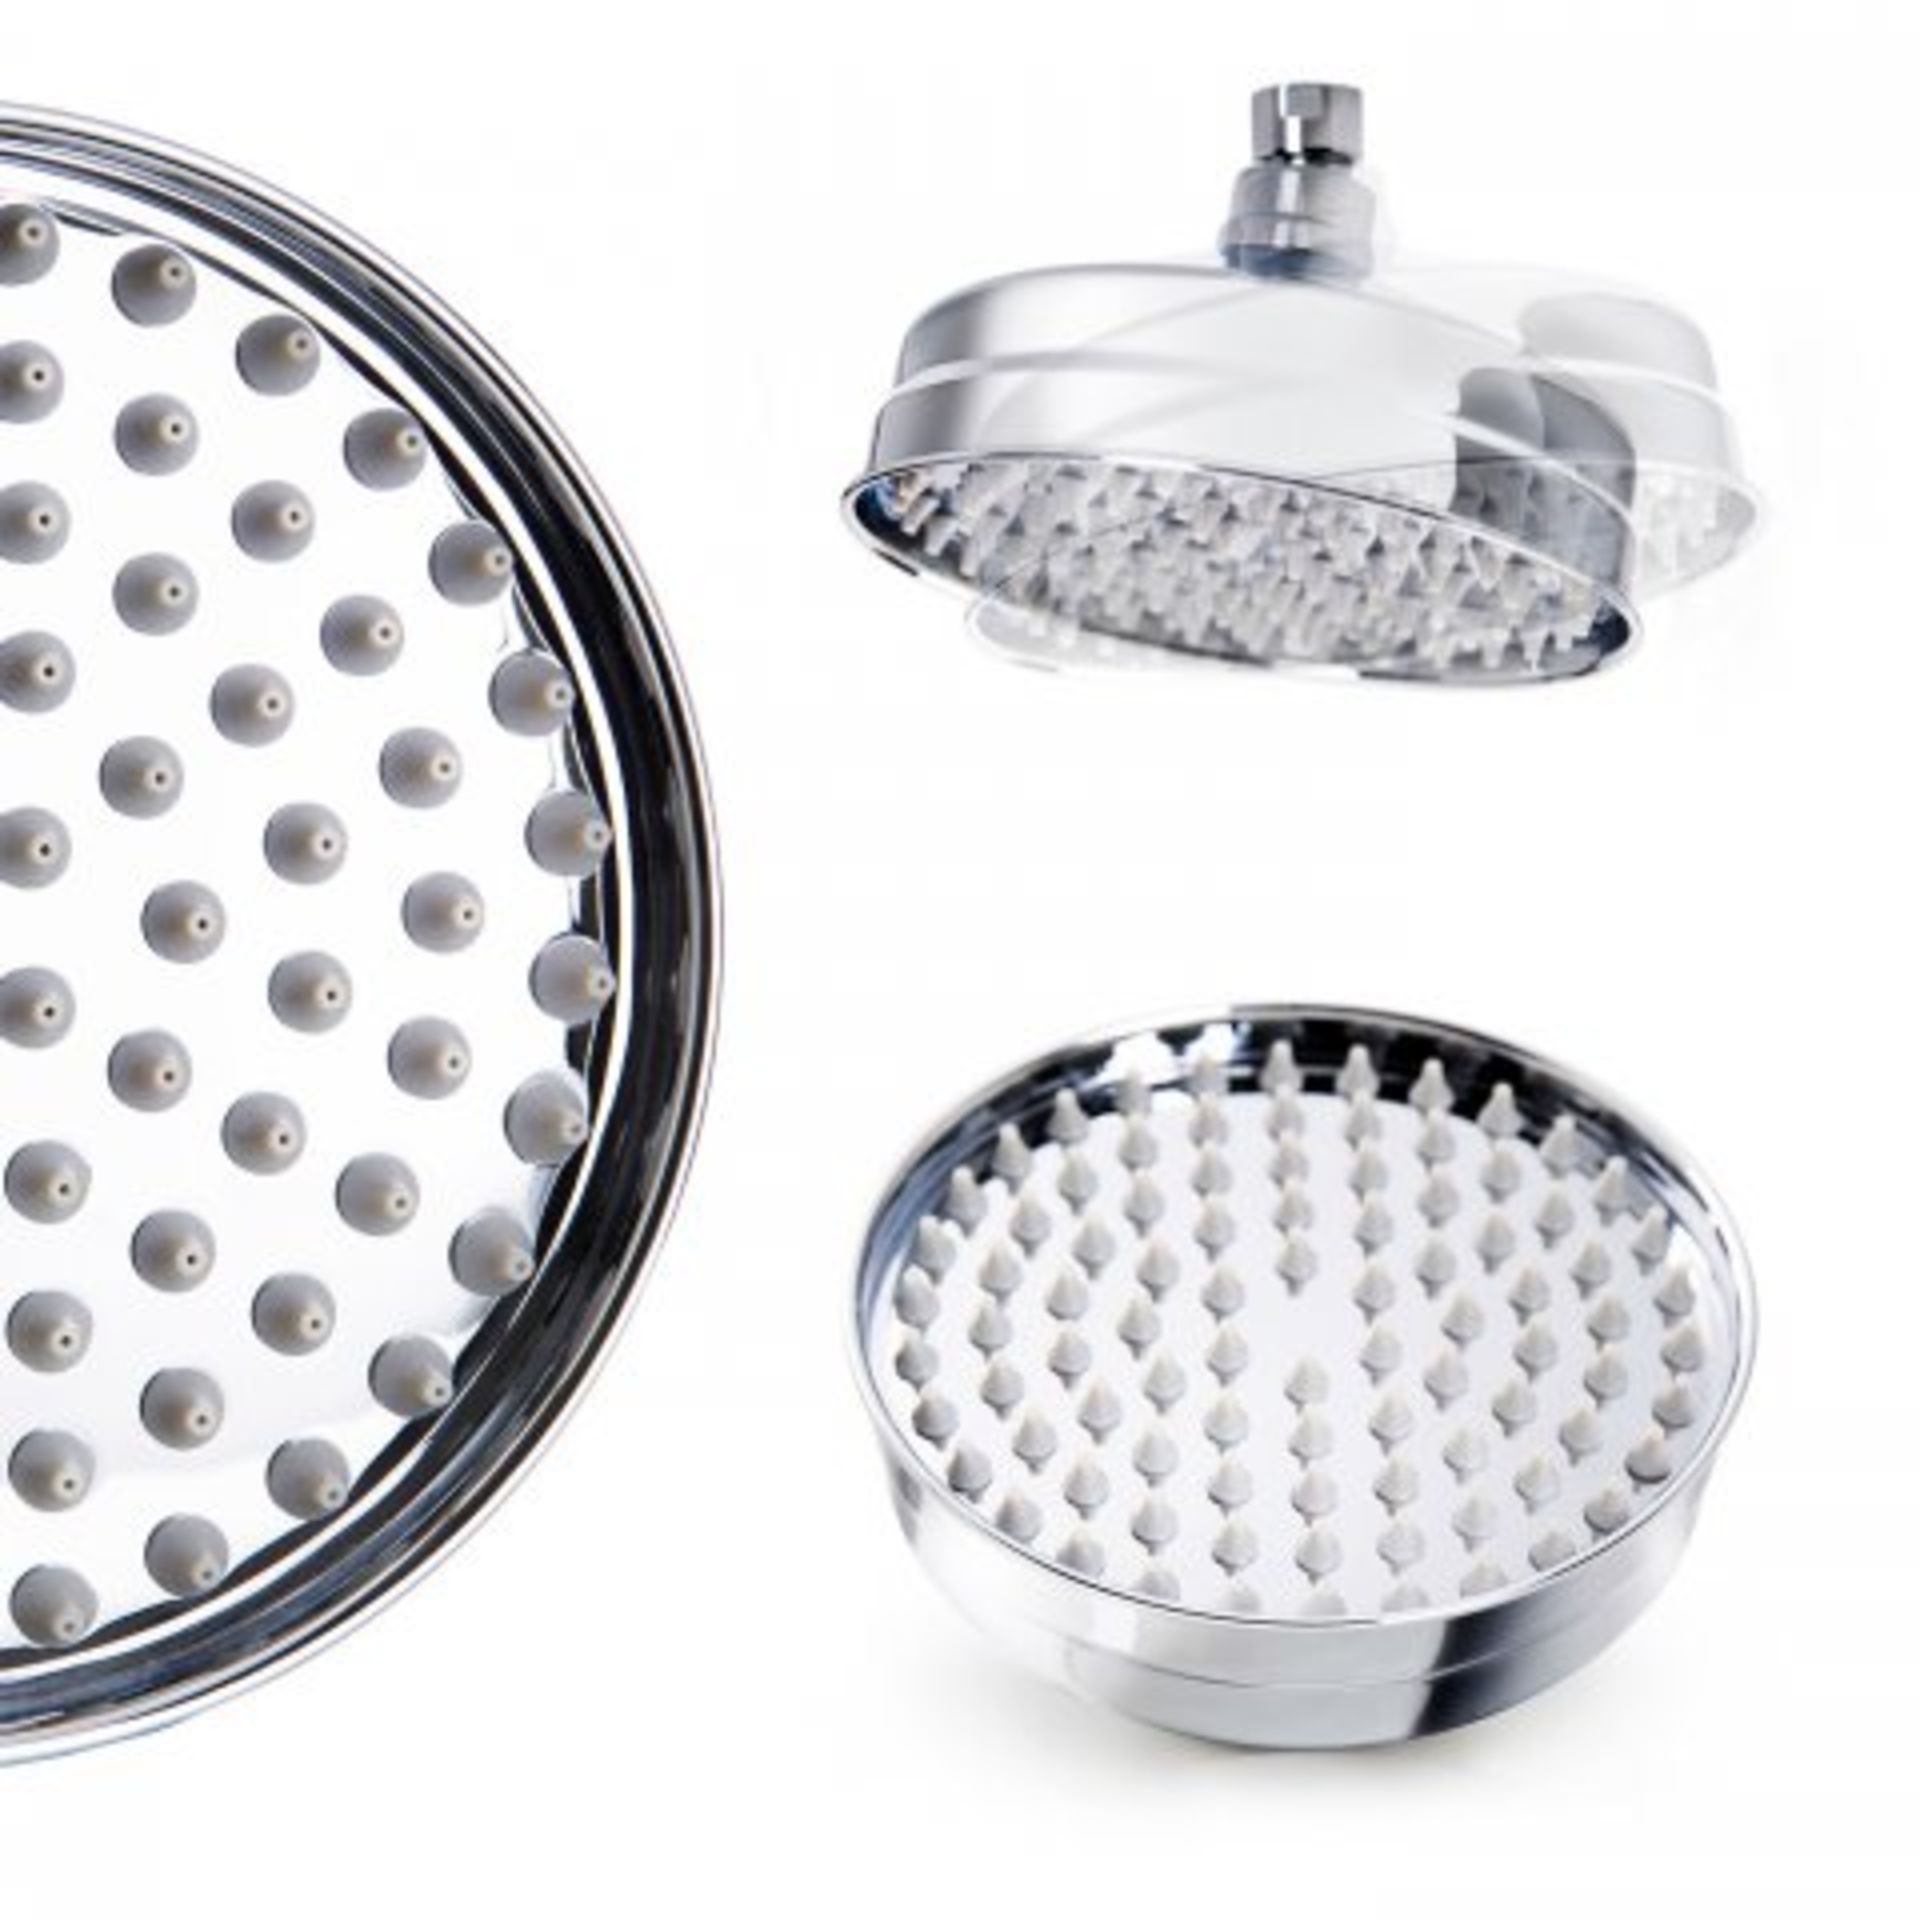 (P138) Stainless Steel 200mm Traditional Round Shower Head. RRP £99.99. Our stunning 200mm - Image 2 of 3